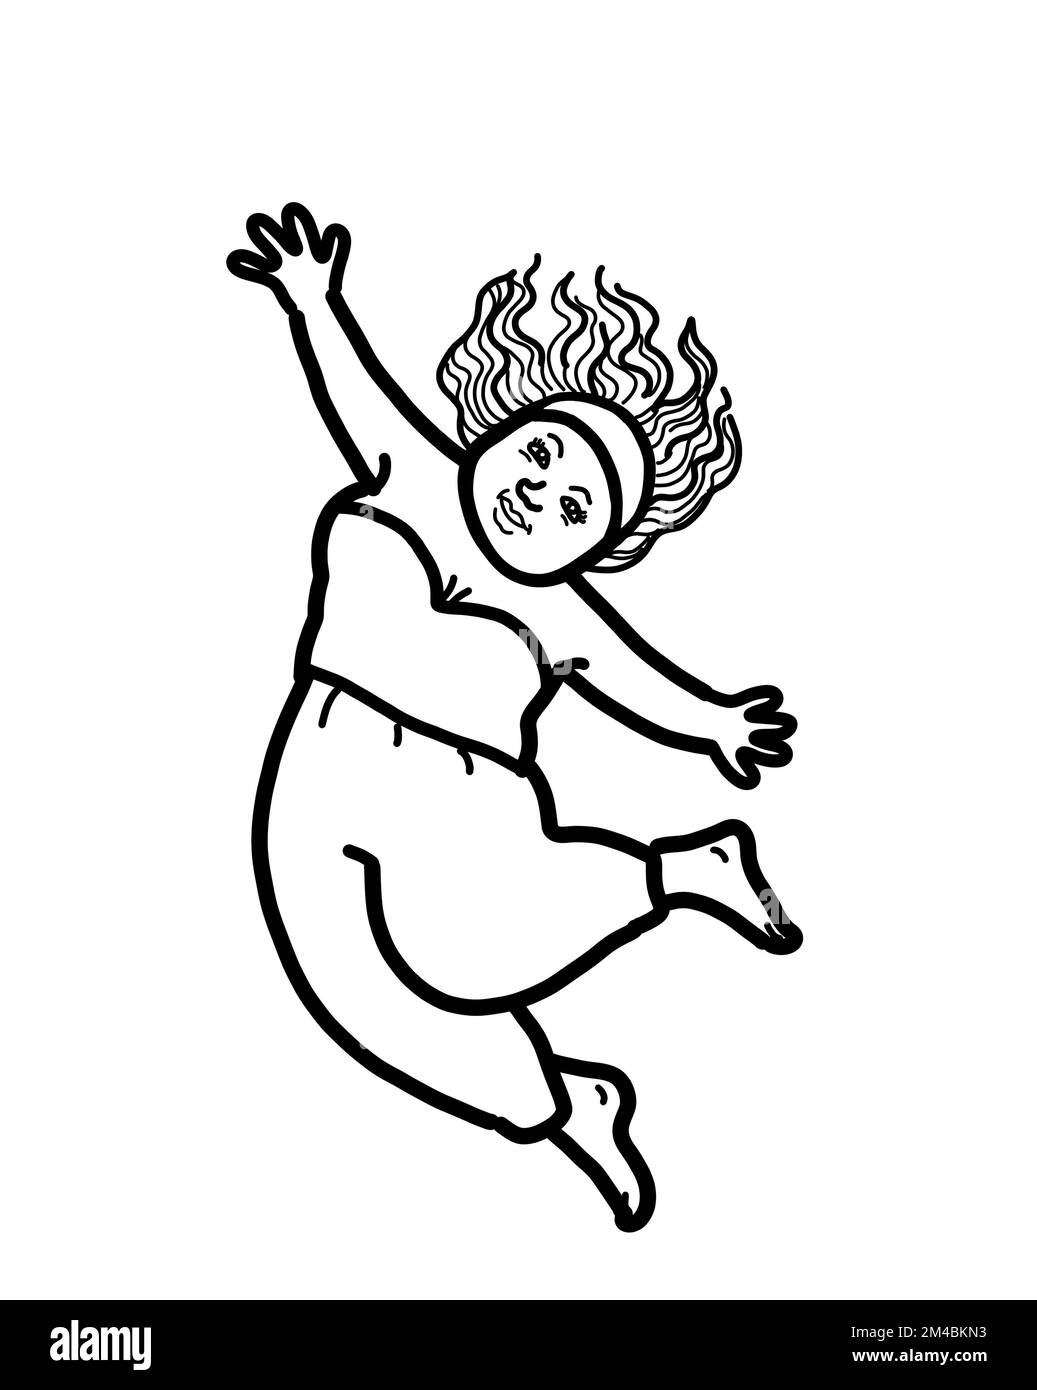 A young happy woman jumping, arm raised. Illustration black and white outline drawing with a copy space. Stock Photo